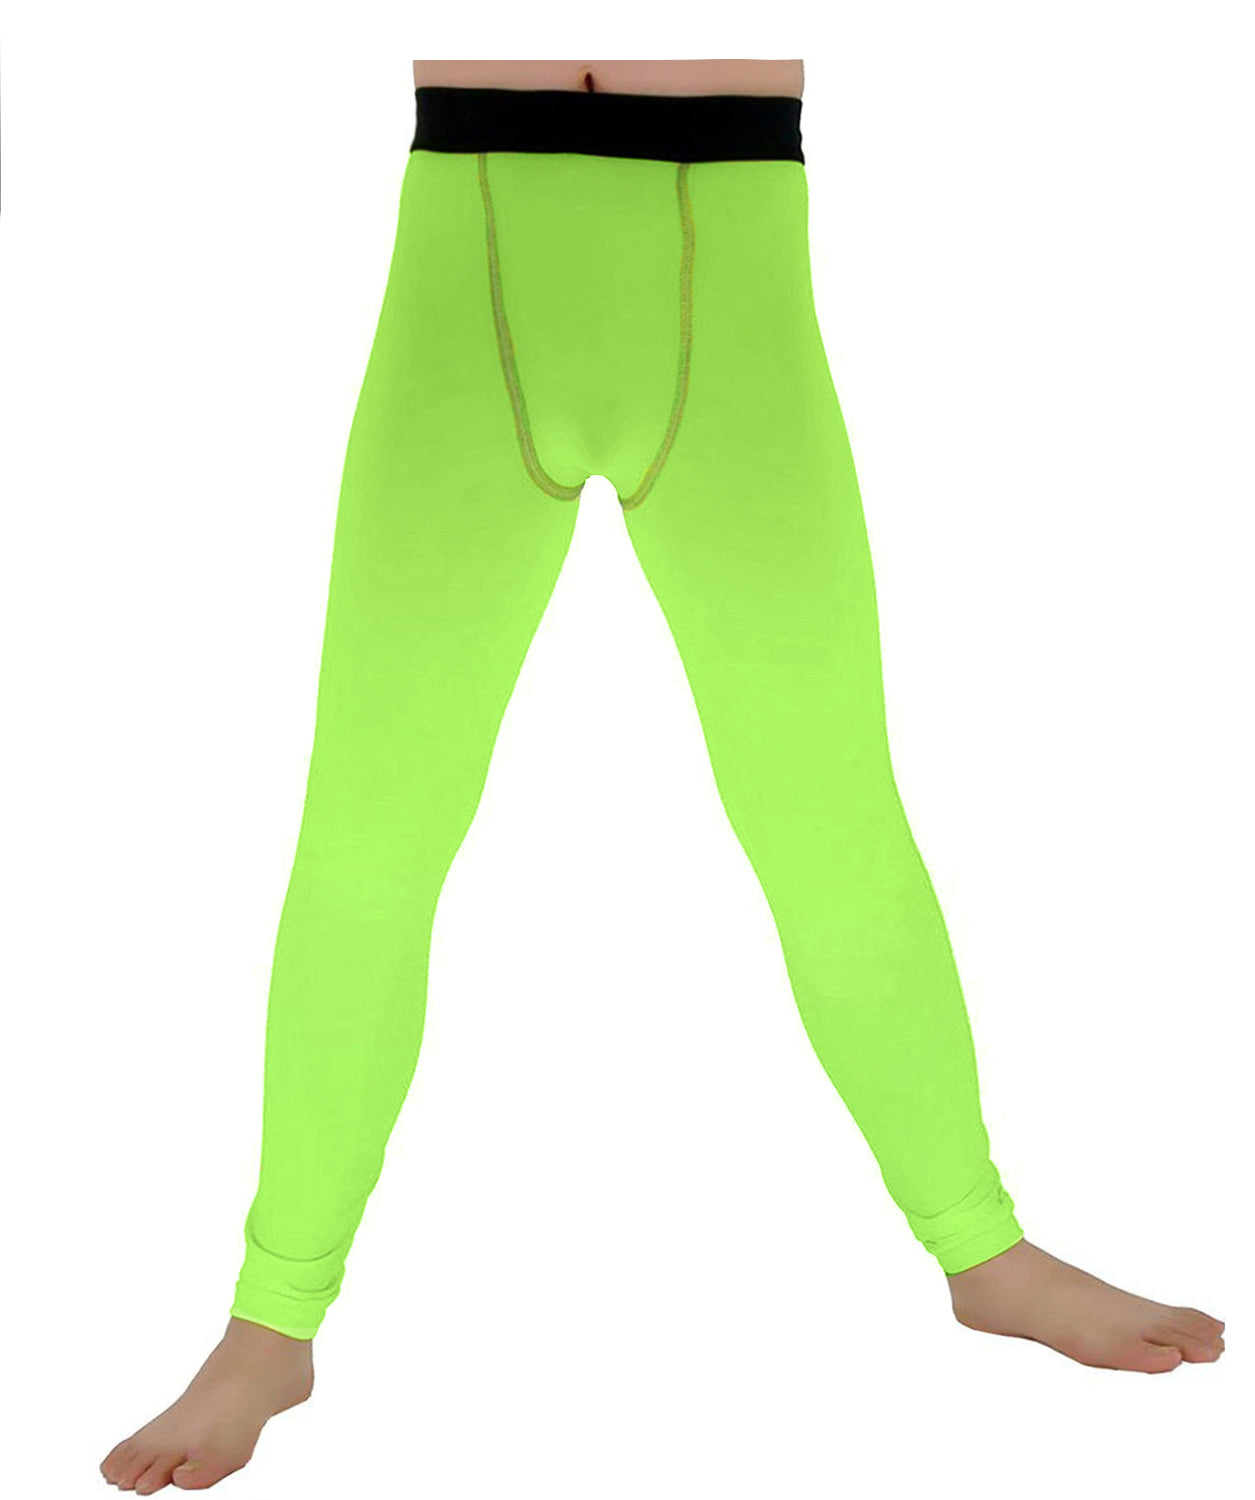  Women's Sports Compression Pants & Tights - Green